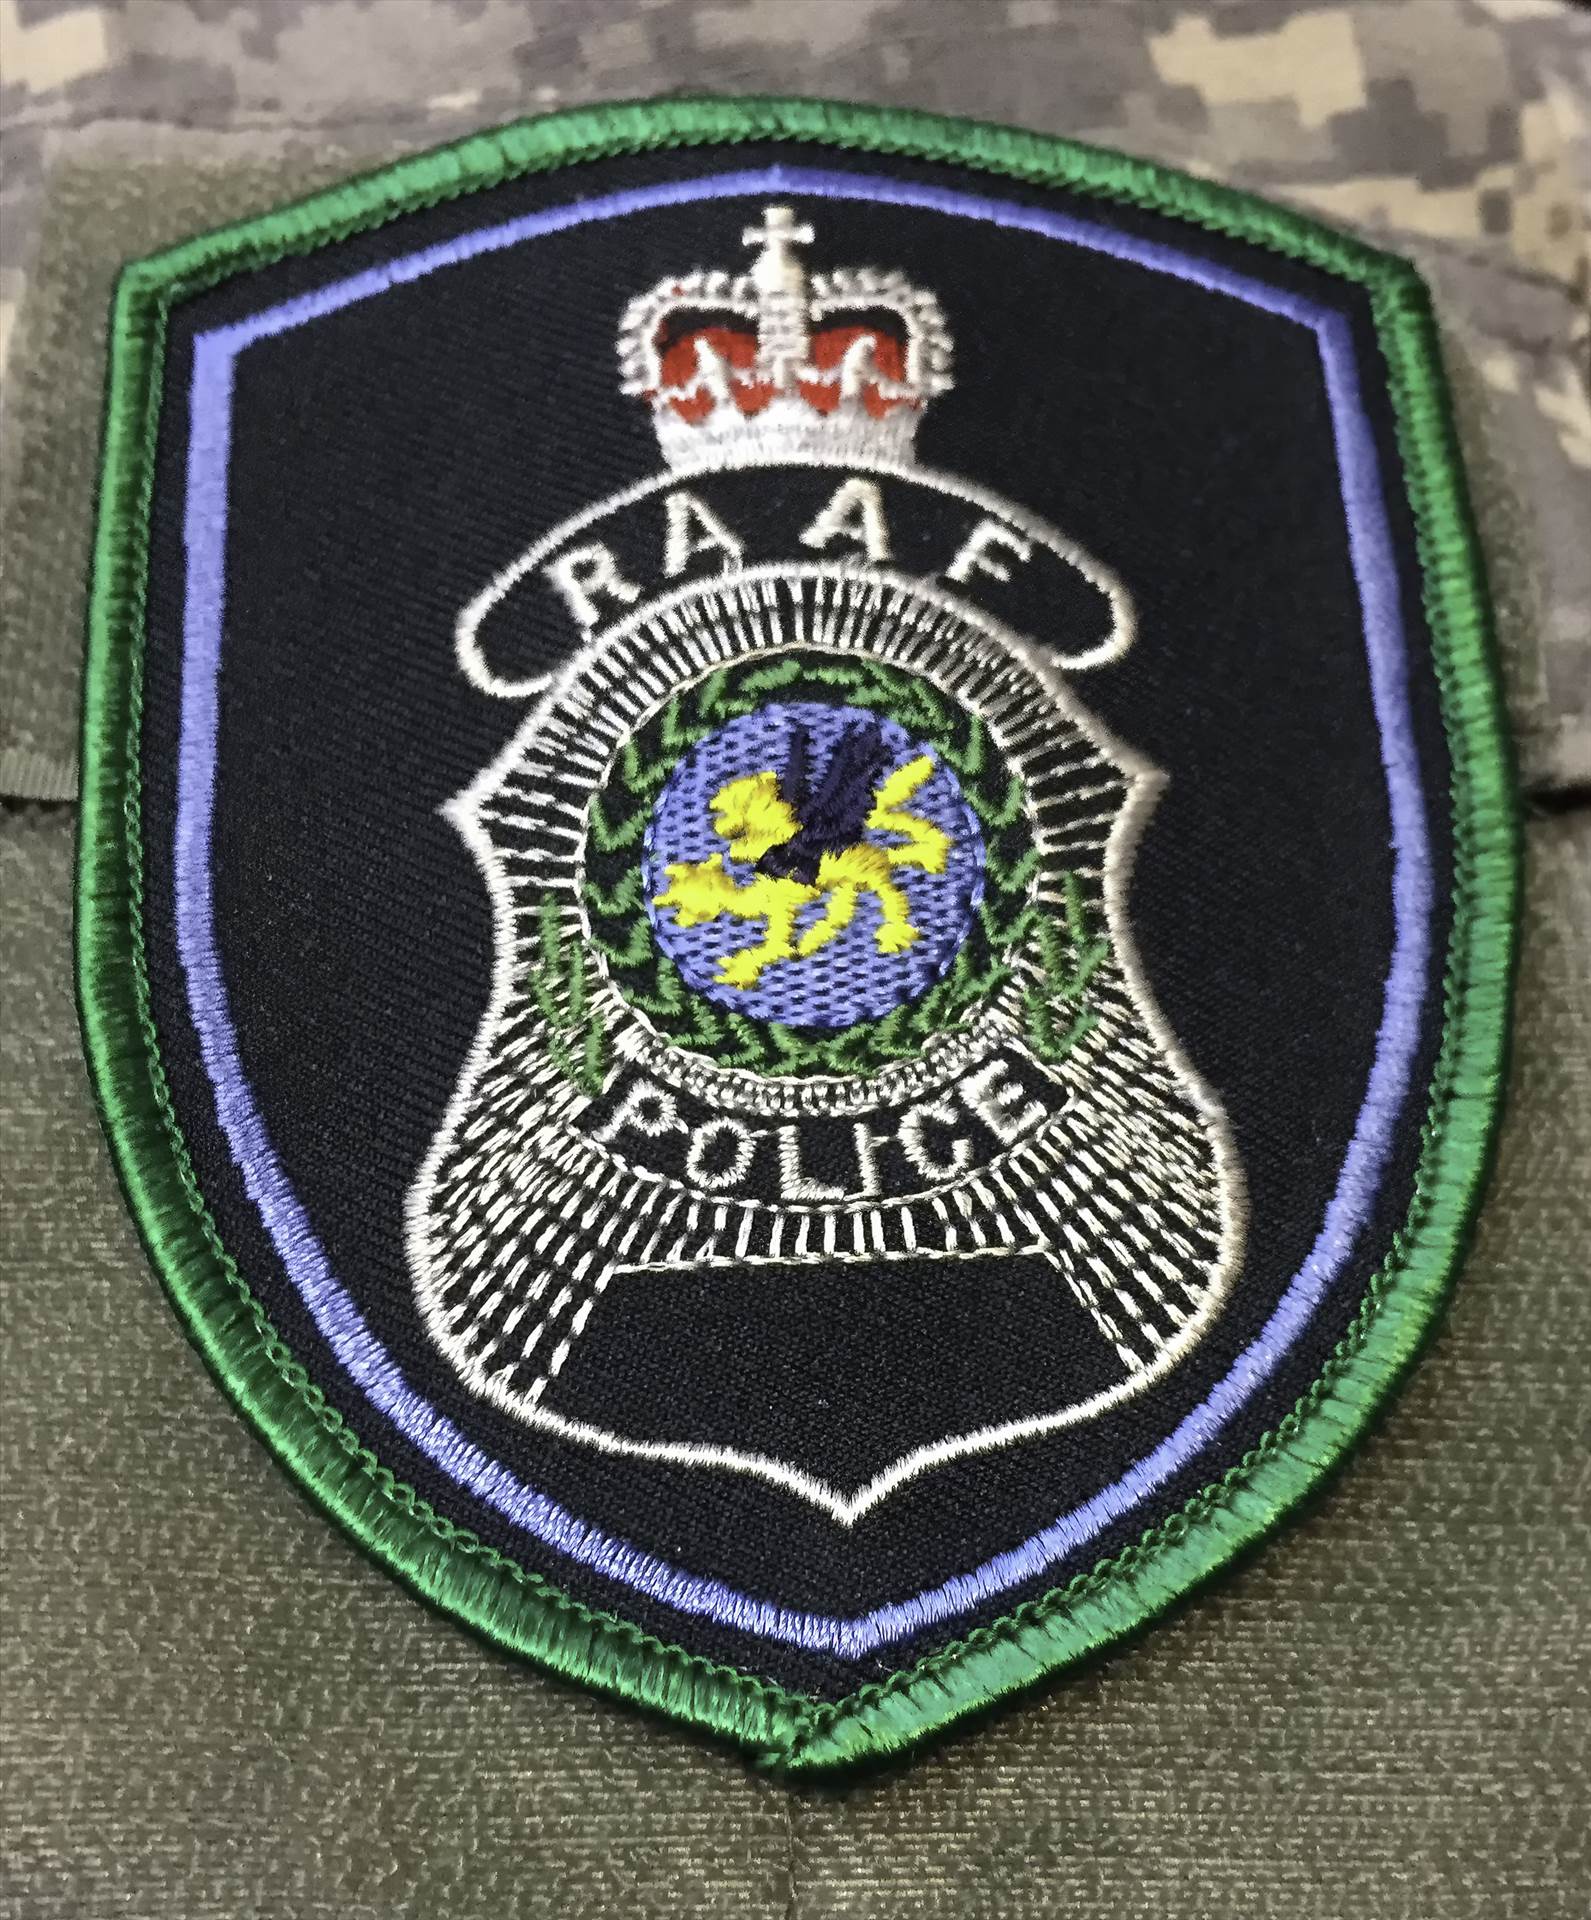 RAAF POLICE PATCH RAAF POLICE PATCH by johntorcasio